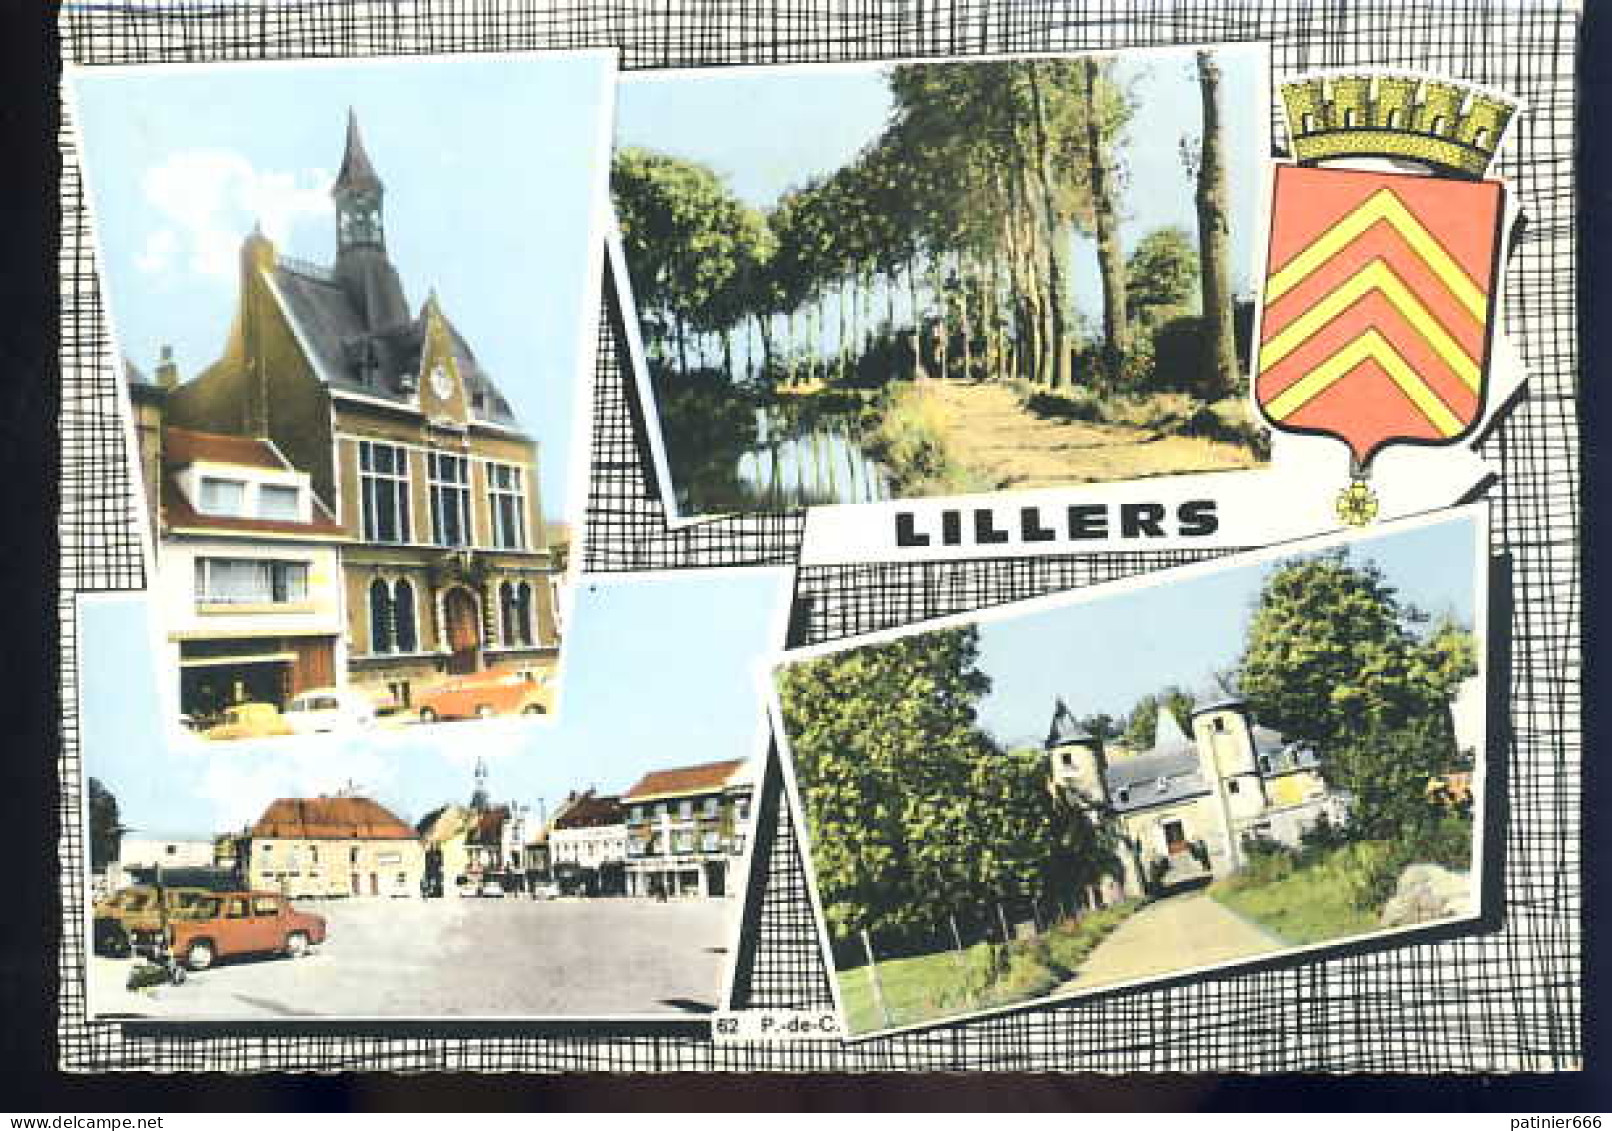 Lillers - Lillers